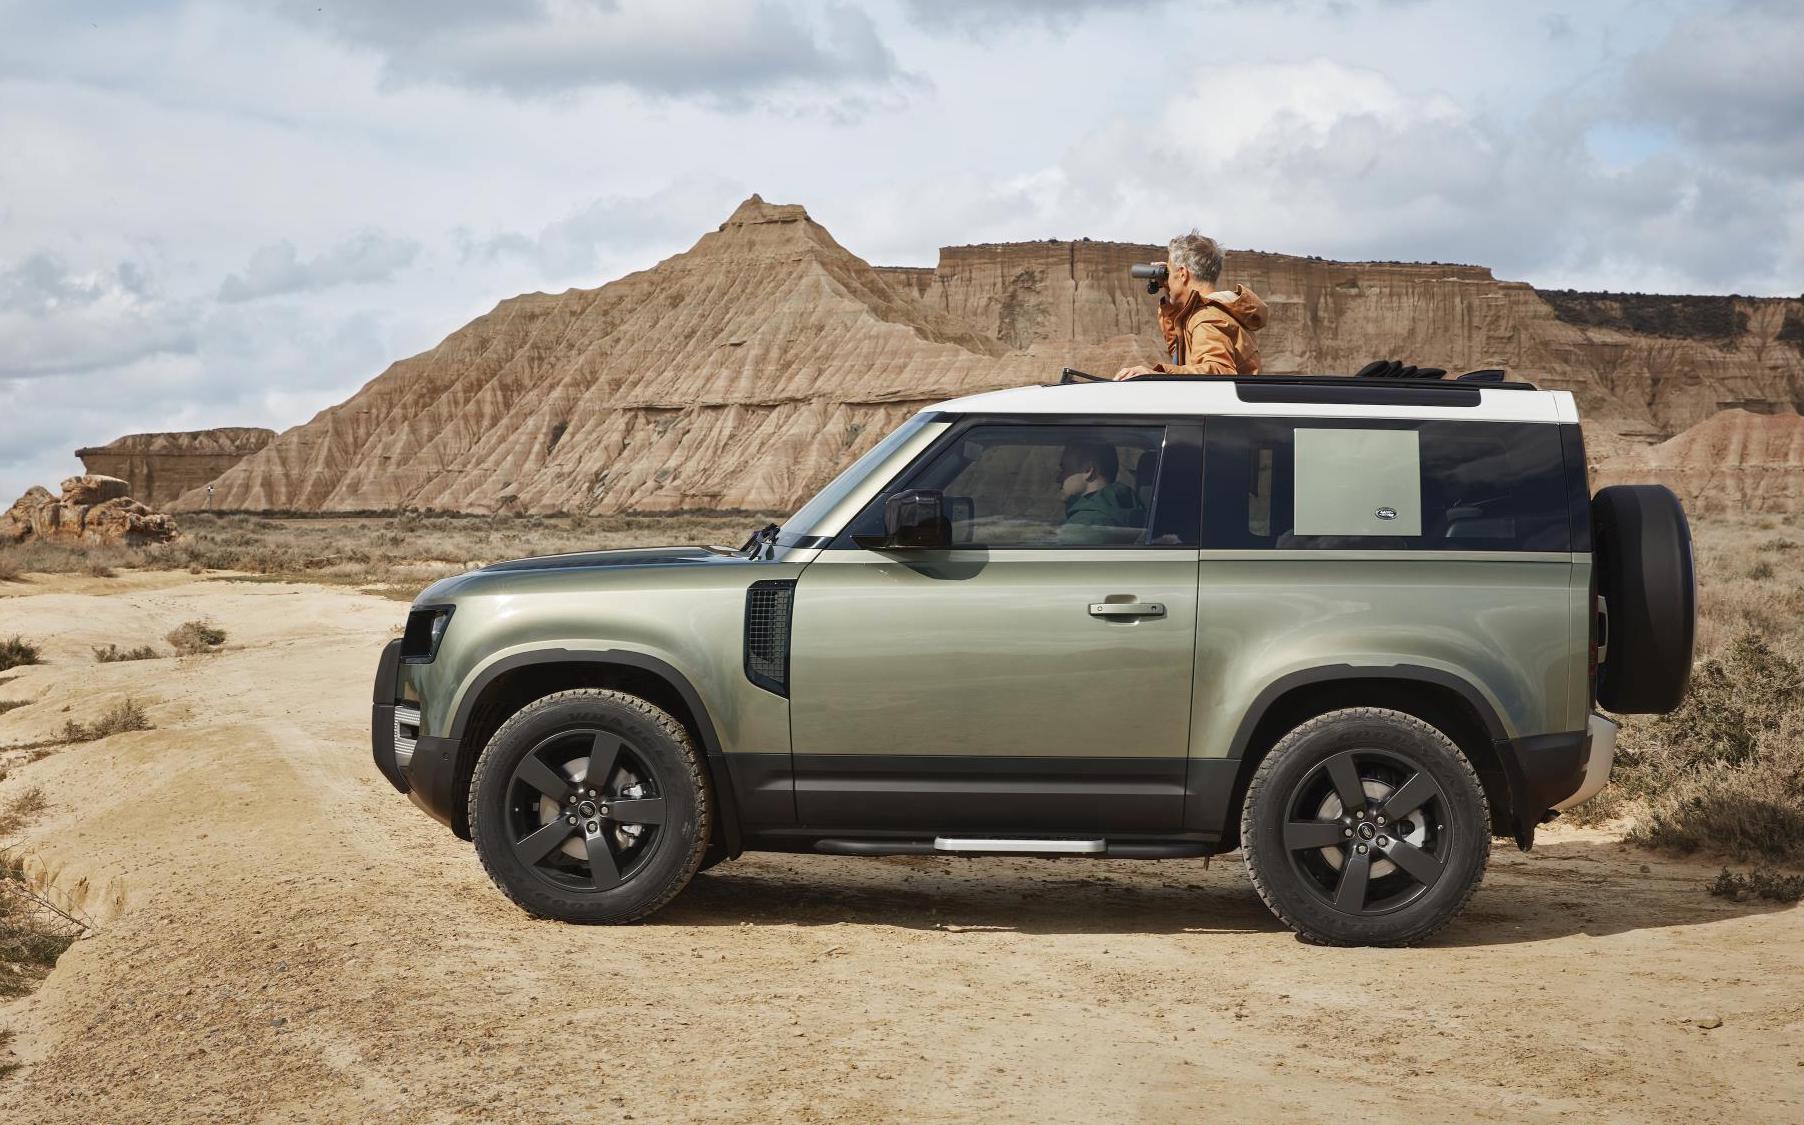 2020 Land Rover Defender officially unveiled